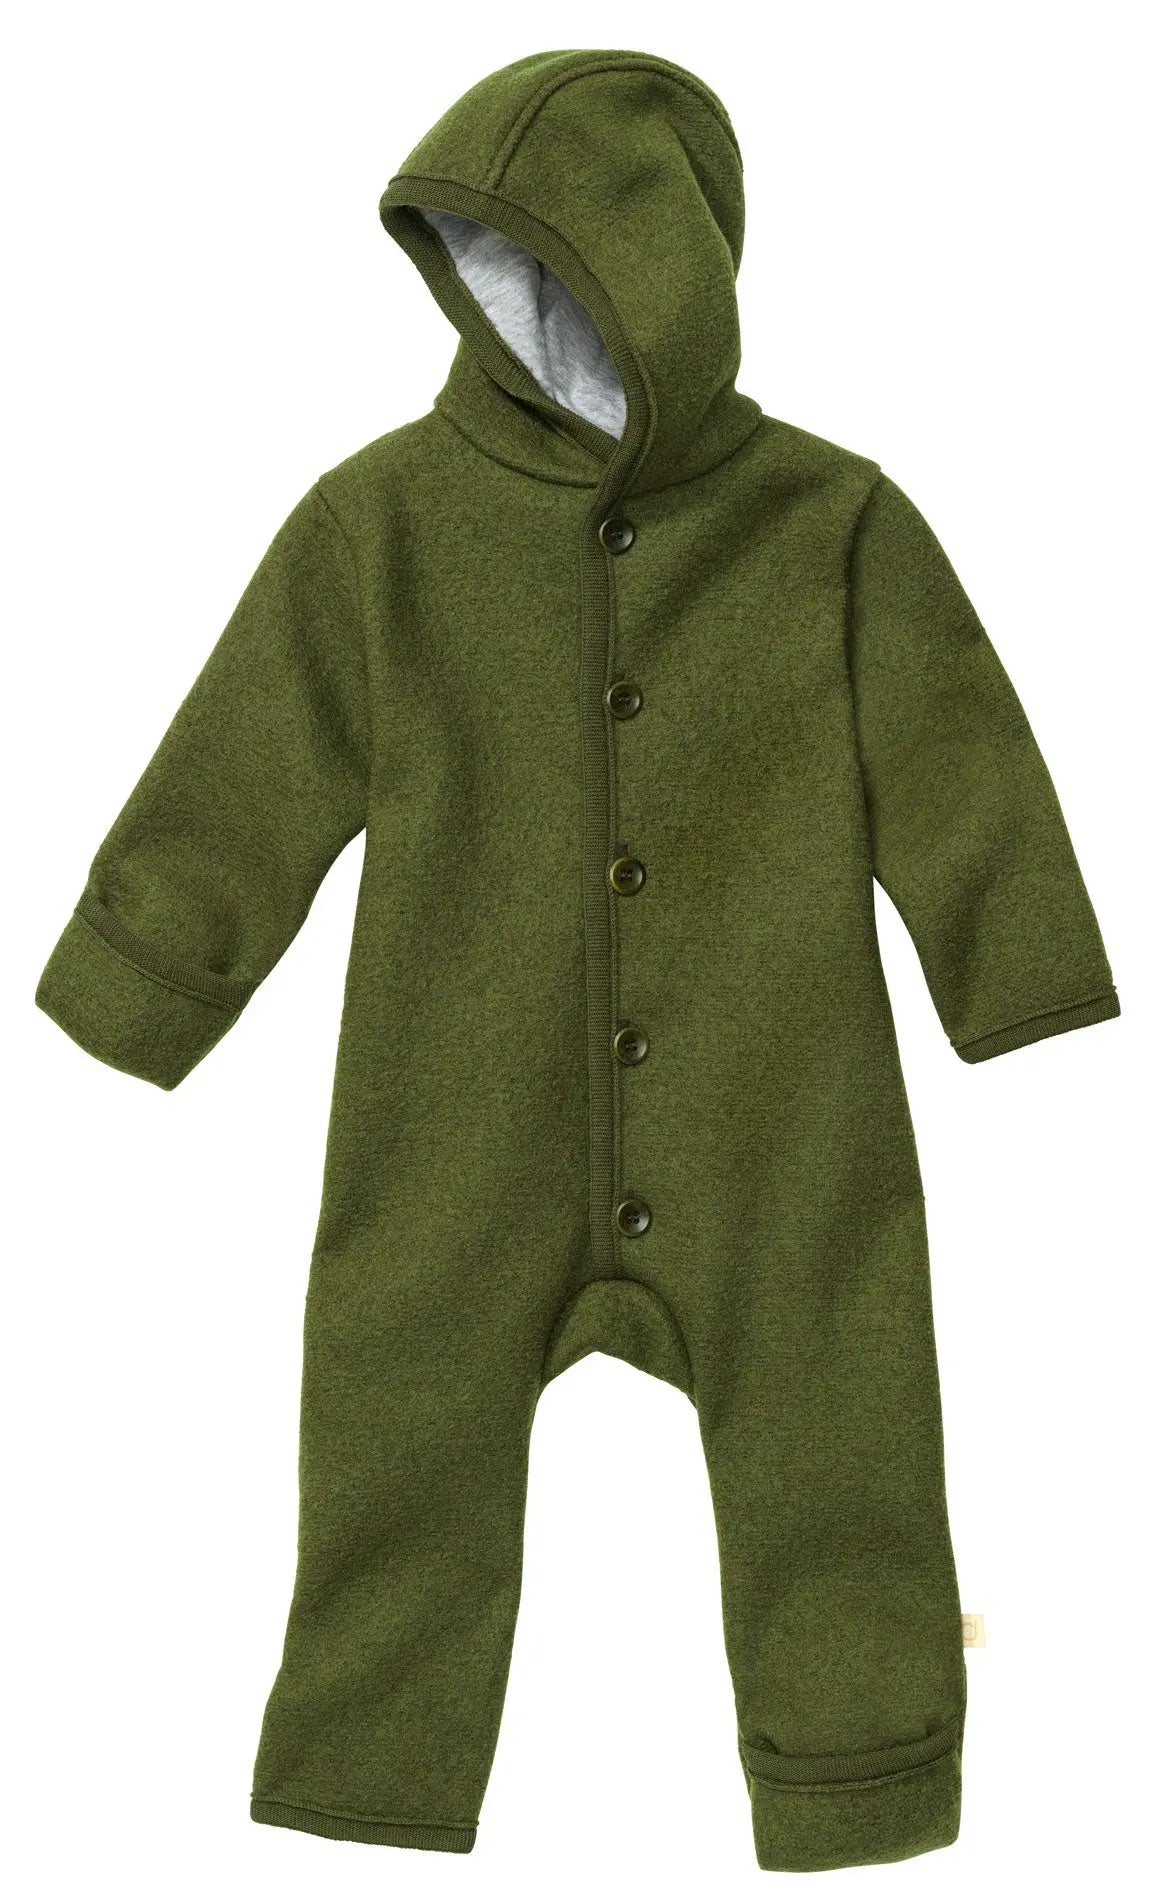 Baby Boiled One-piece Wool Romper / Bunting disana